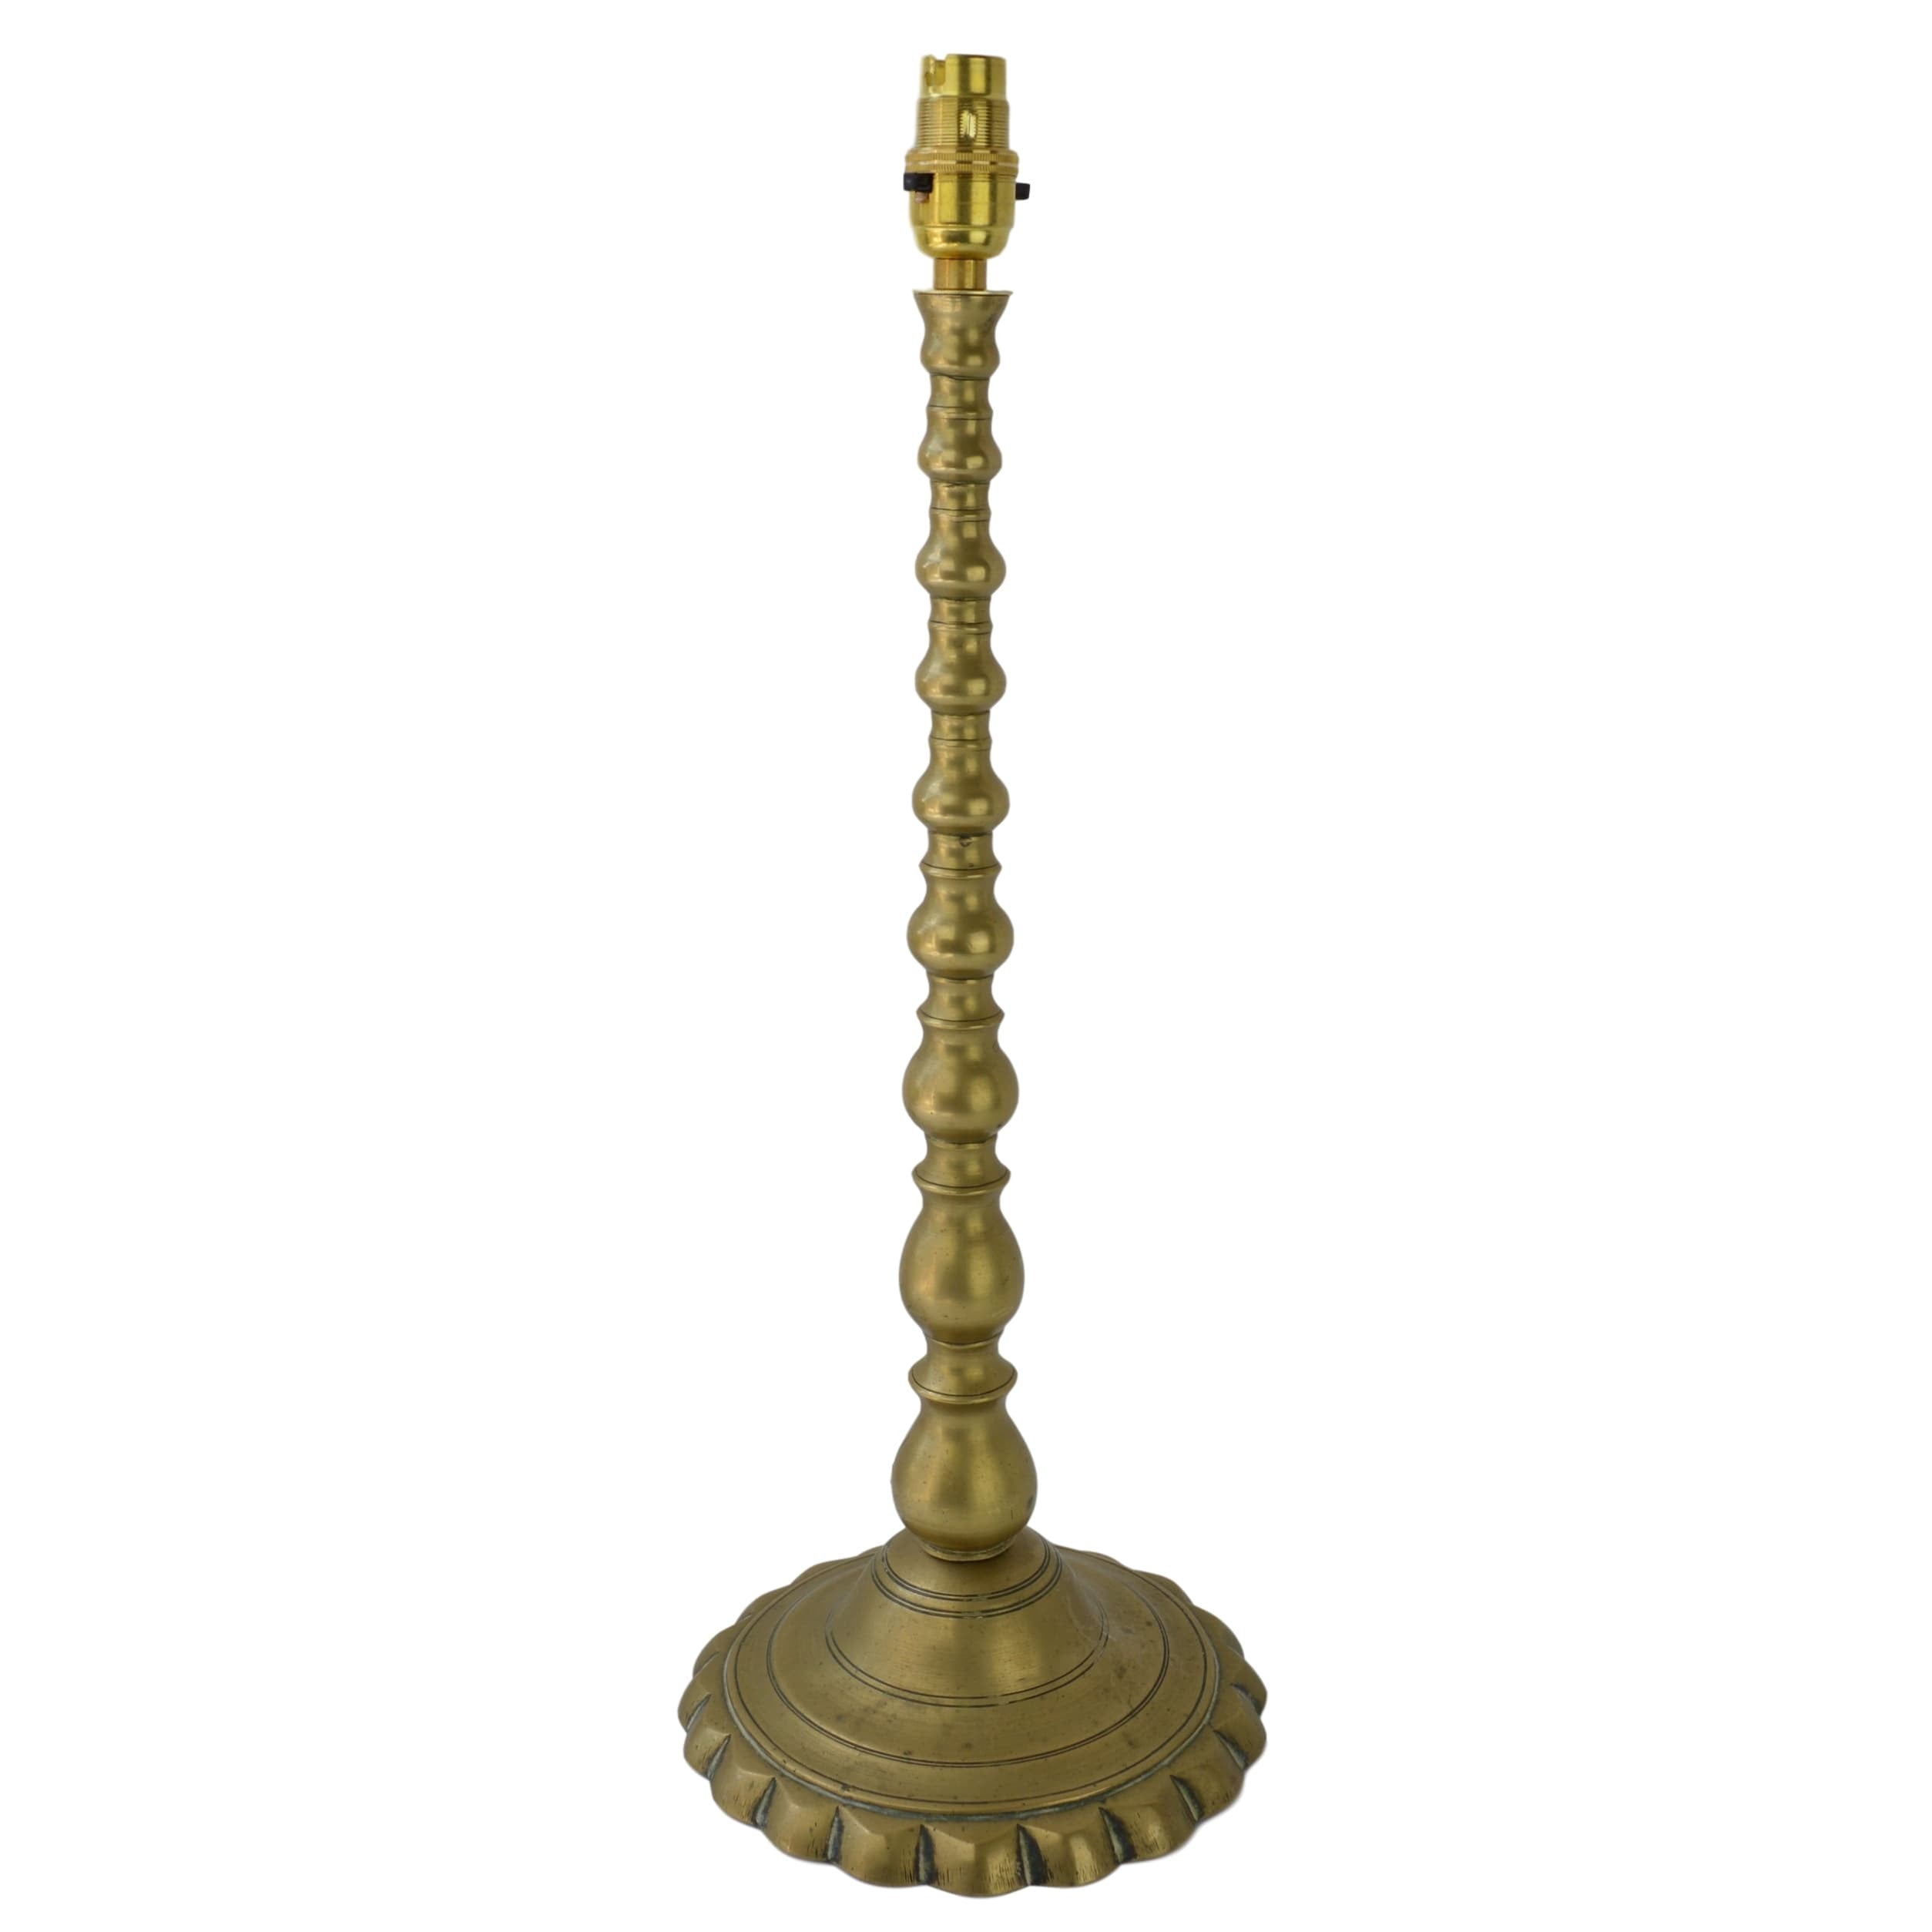 Munro and Kerr brass table lamp 